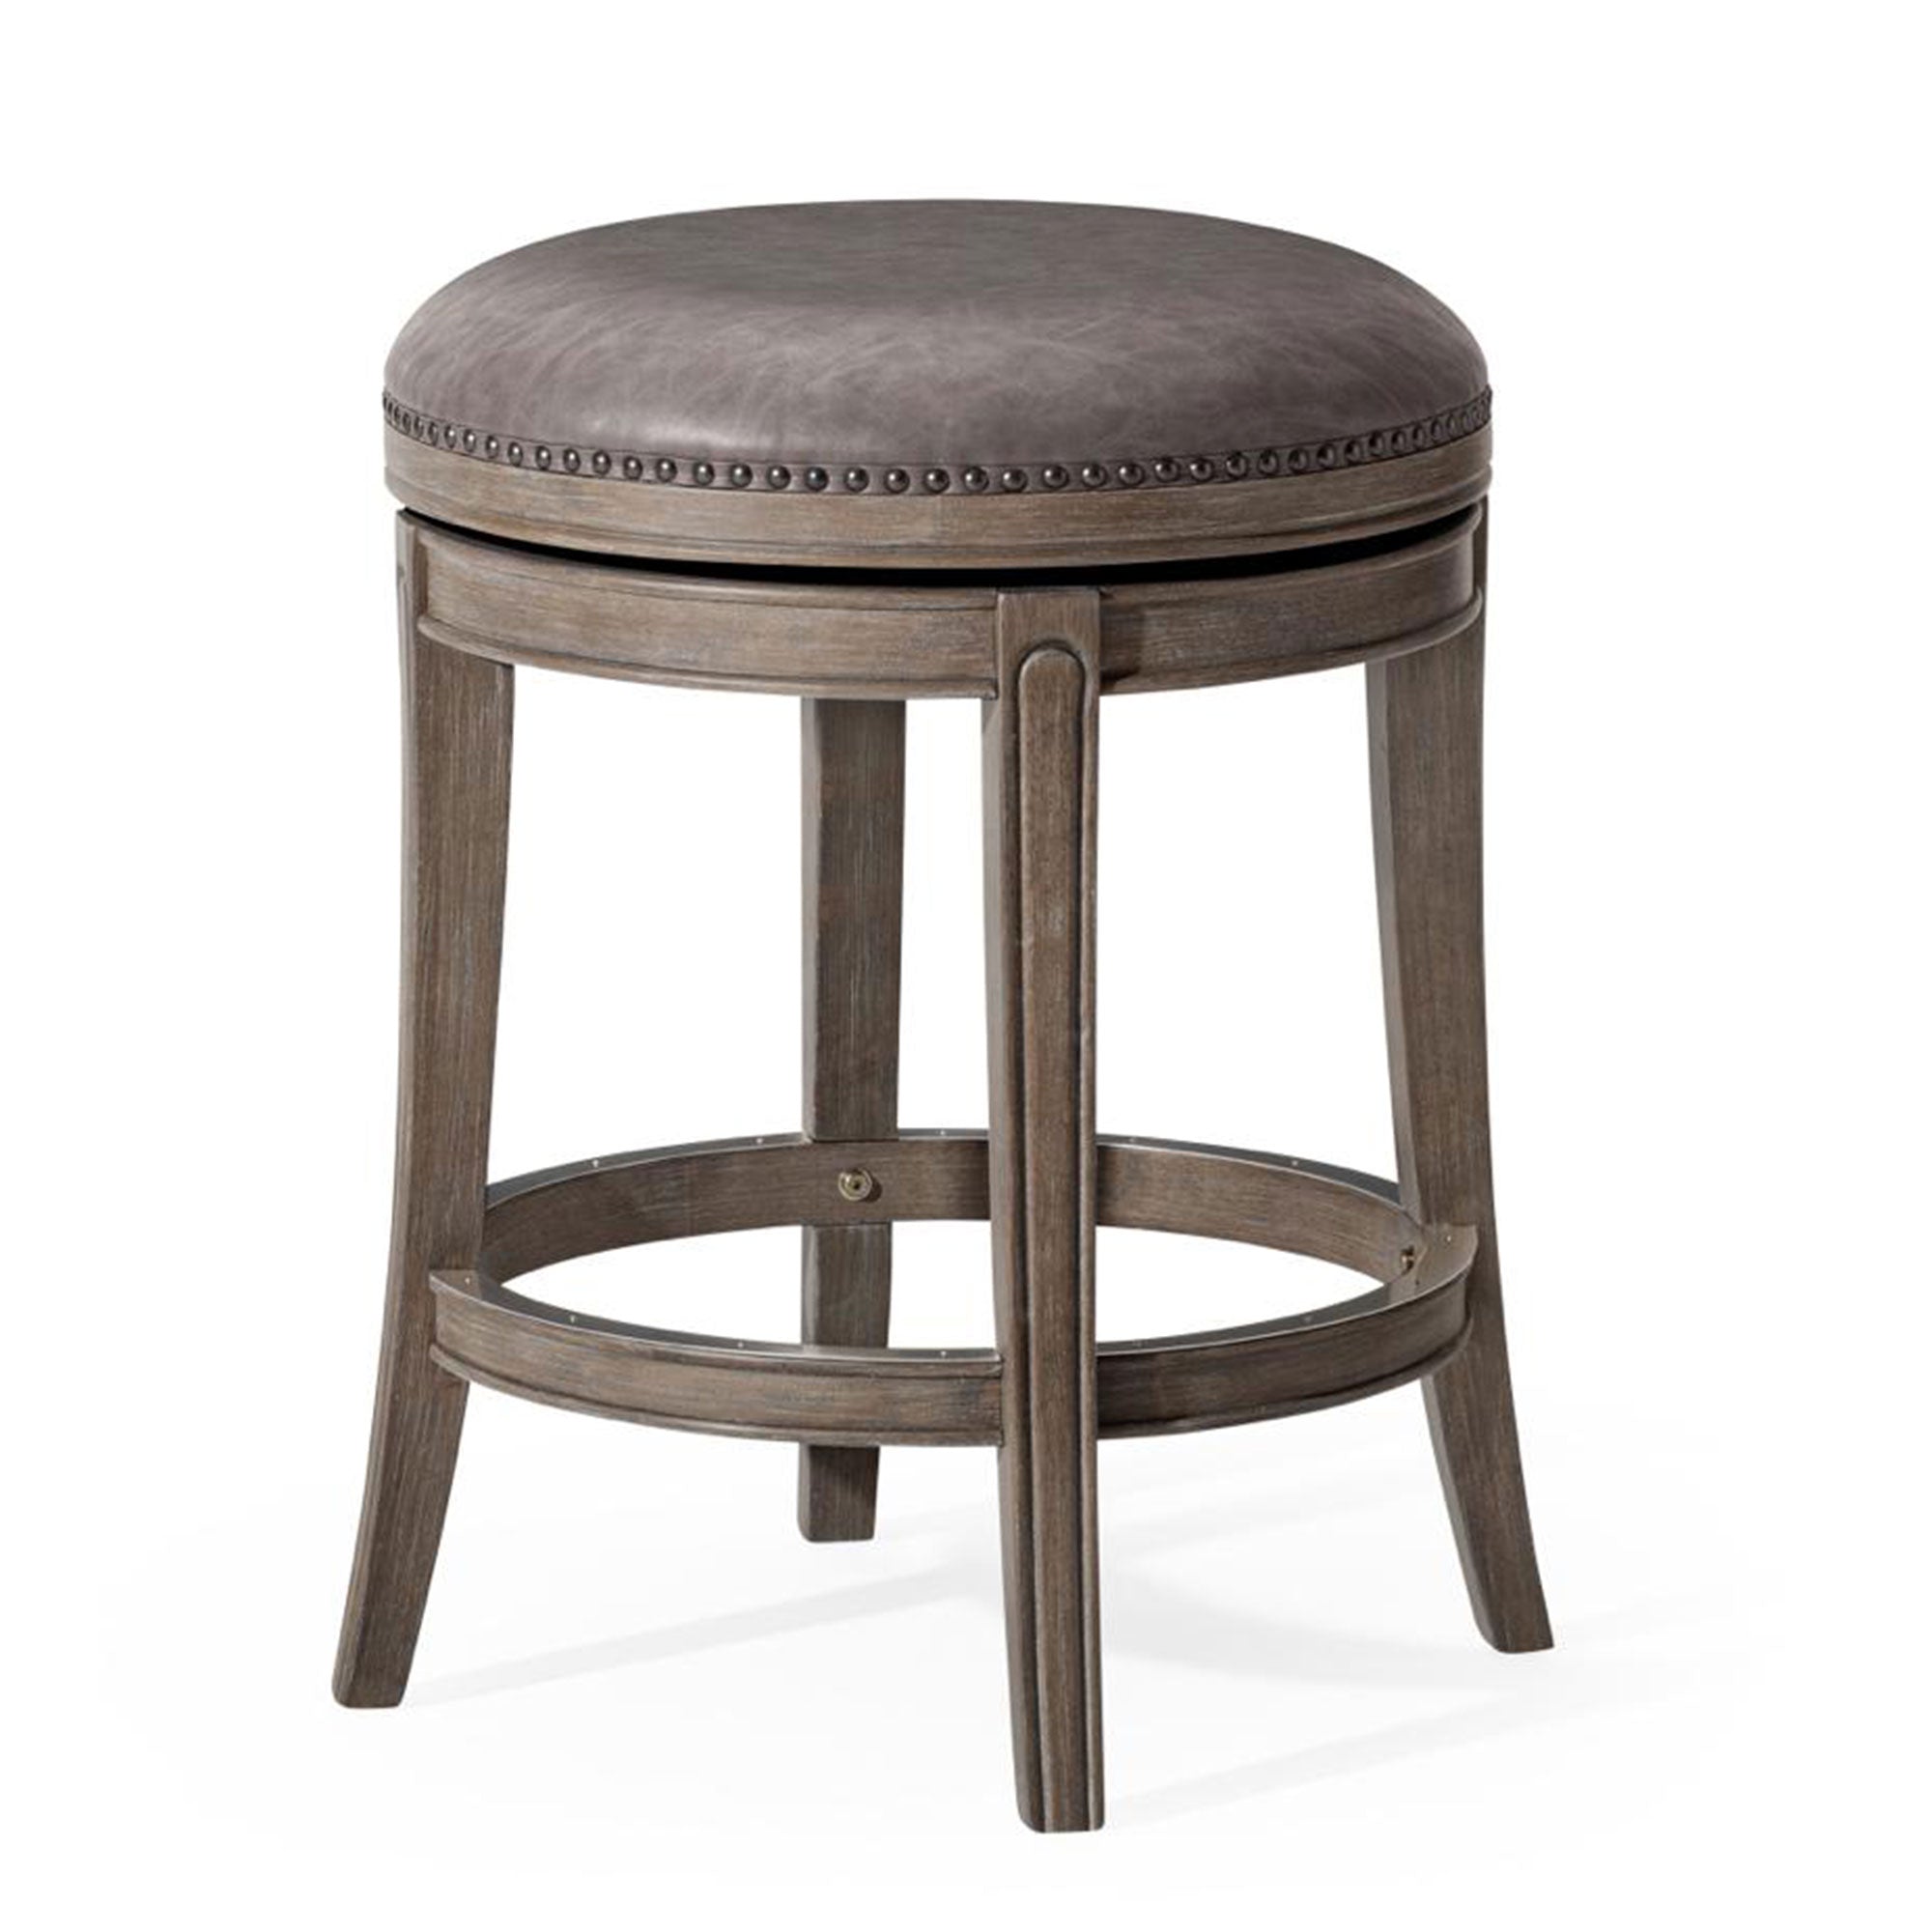 Alexander Backless Counter Stool in Reclaimed Oak Finish with Ronan Stone Vegan Leather in Stools by Maven Lane